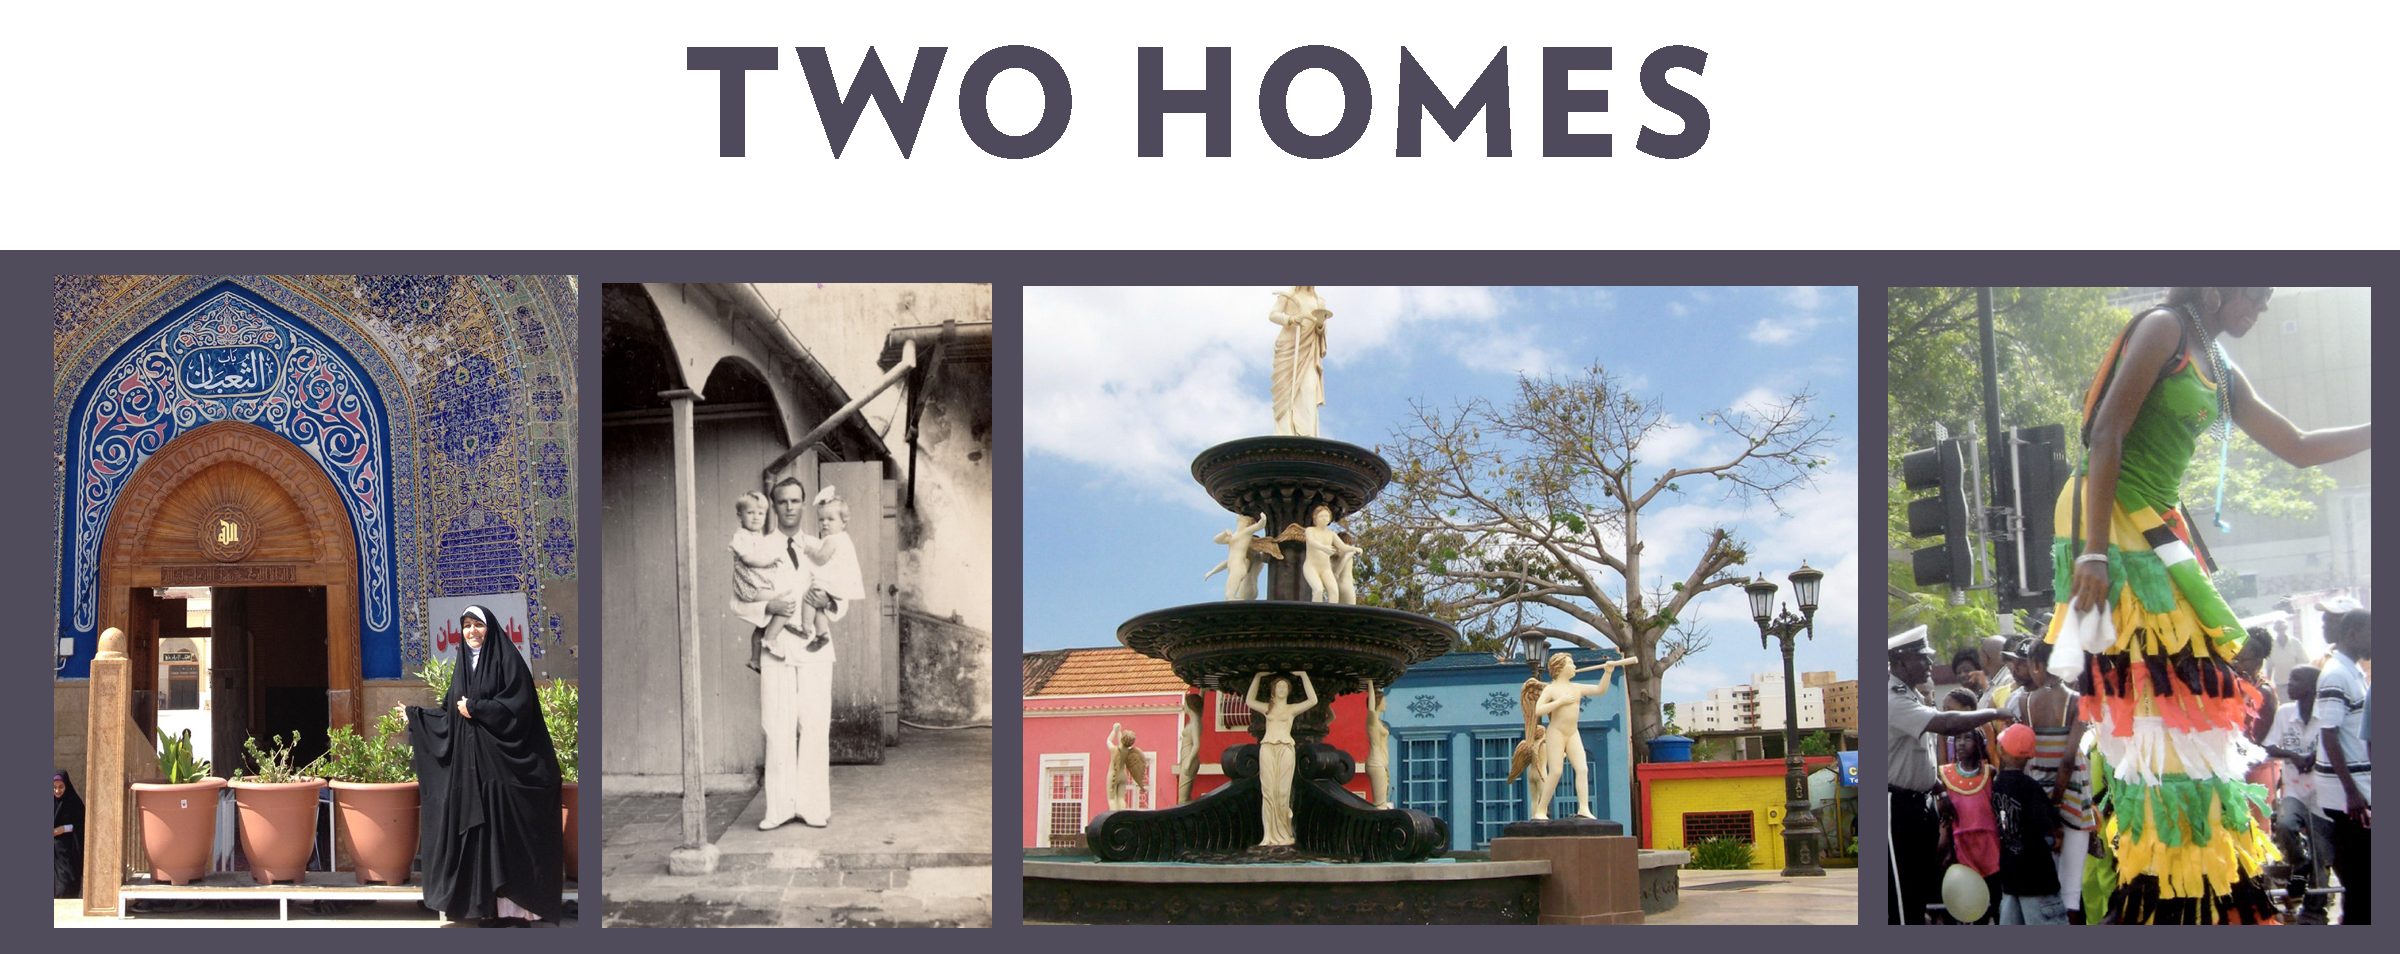 5.Two Homes